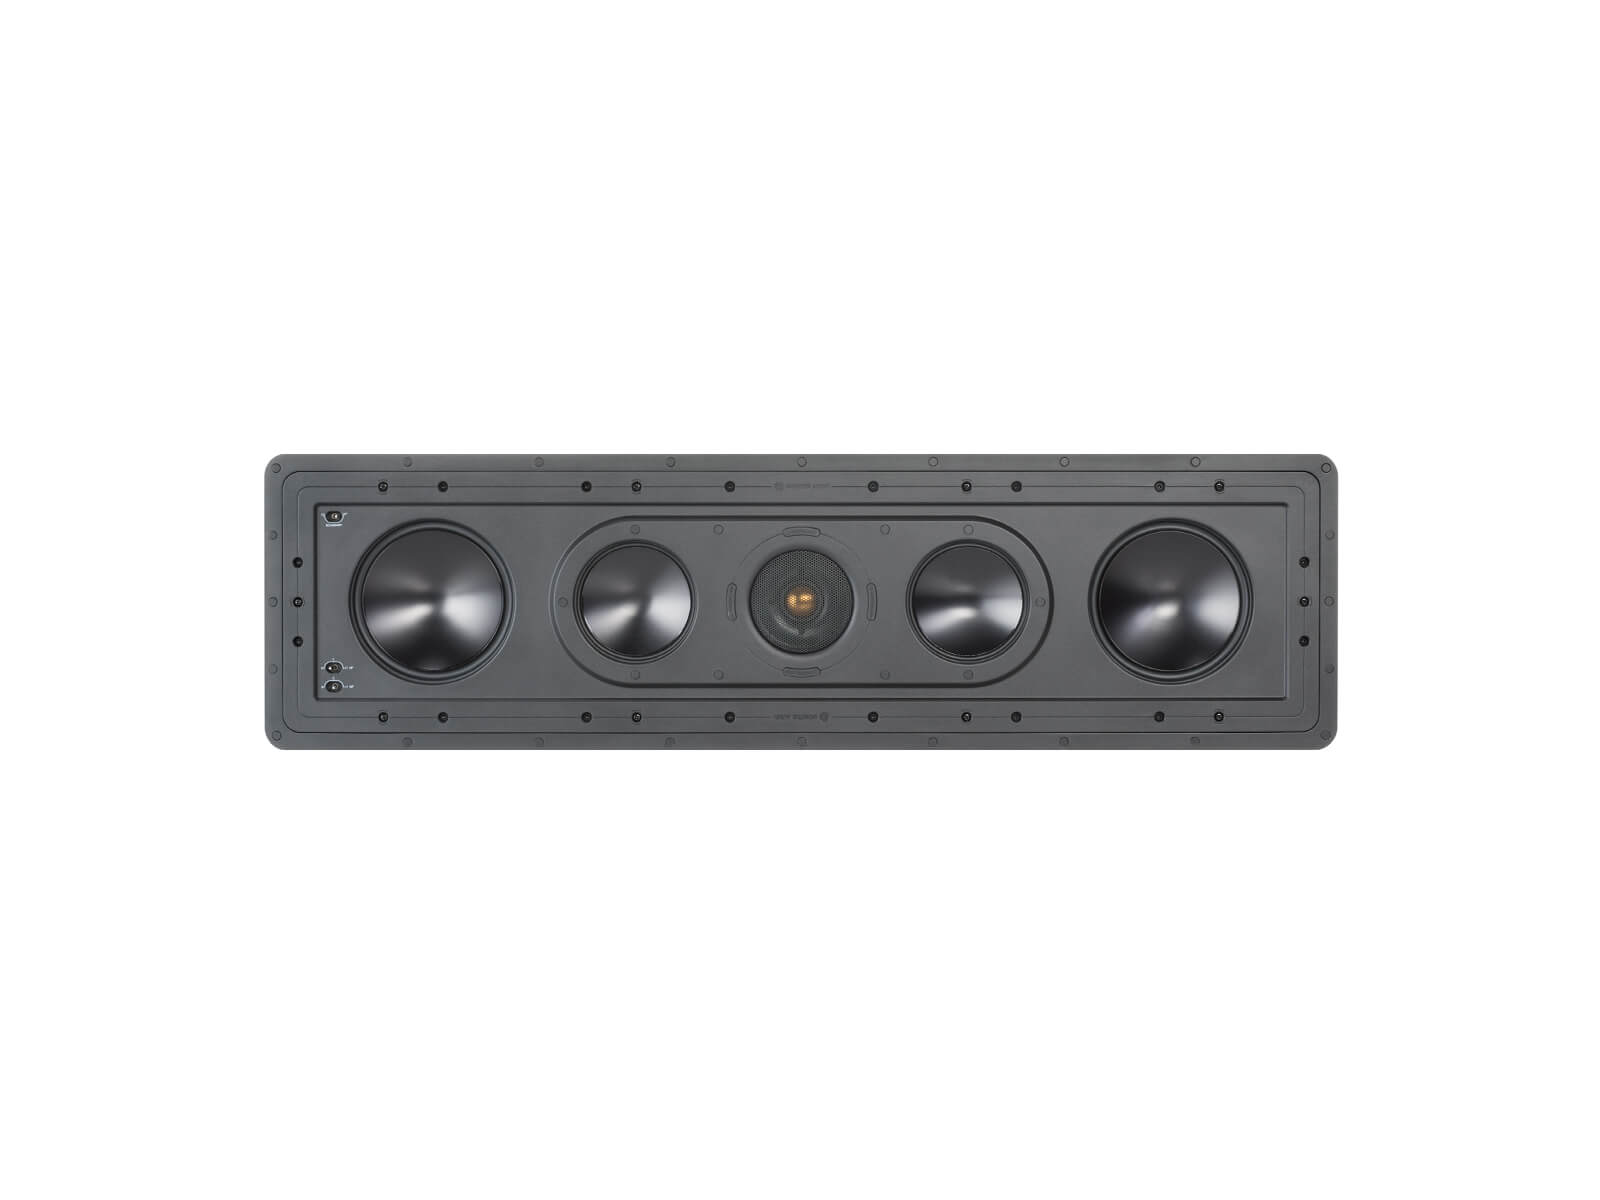 Controlled Performance CP-IW260X, horizontal front-on, grille-less in-wall speakers.